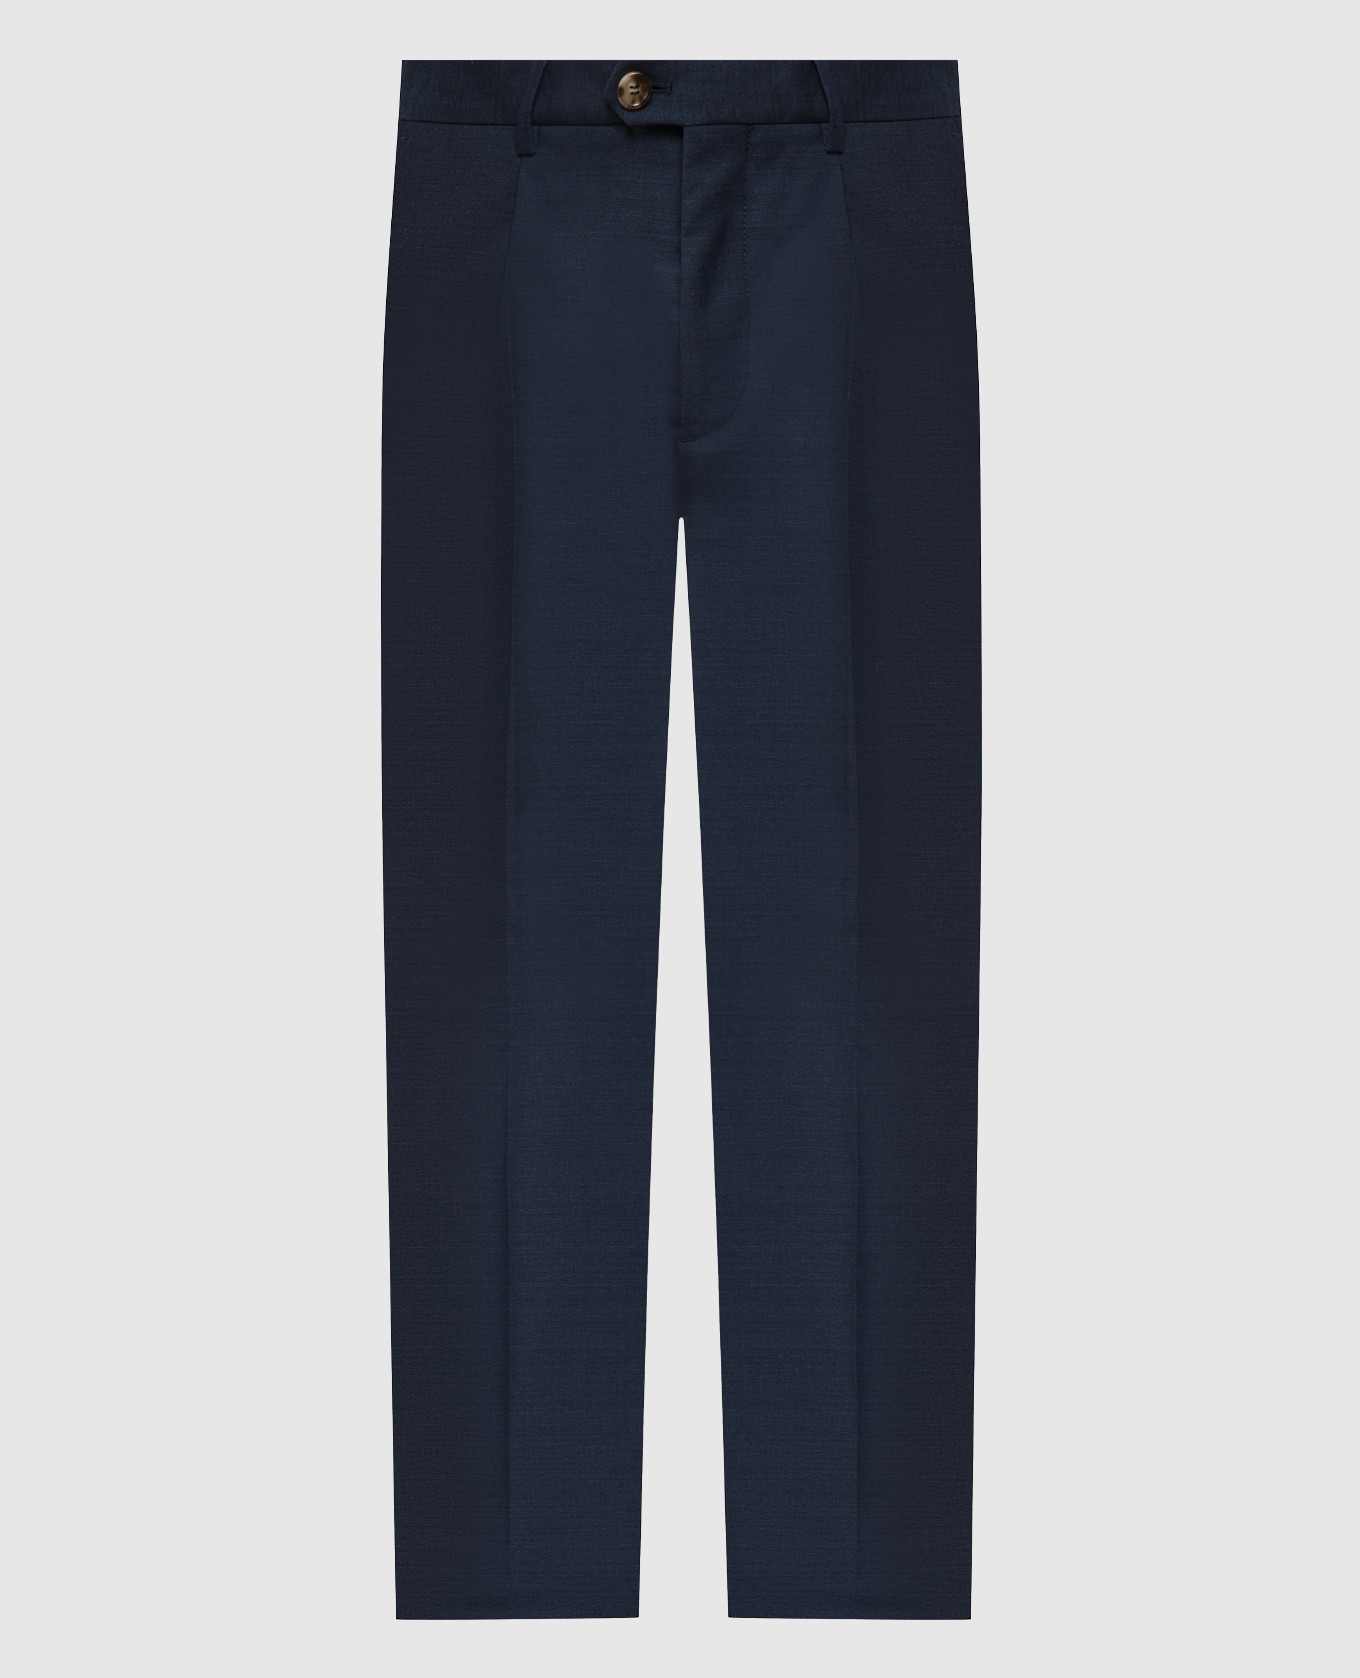 Blue pants made of wool